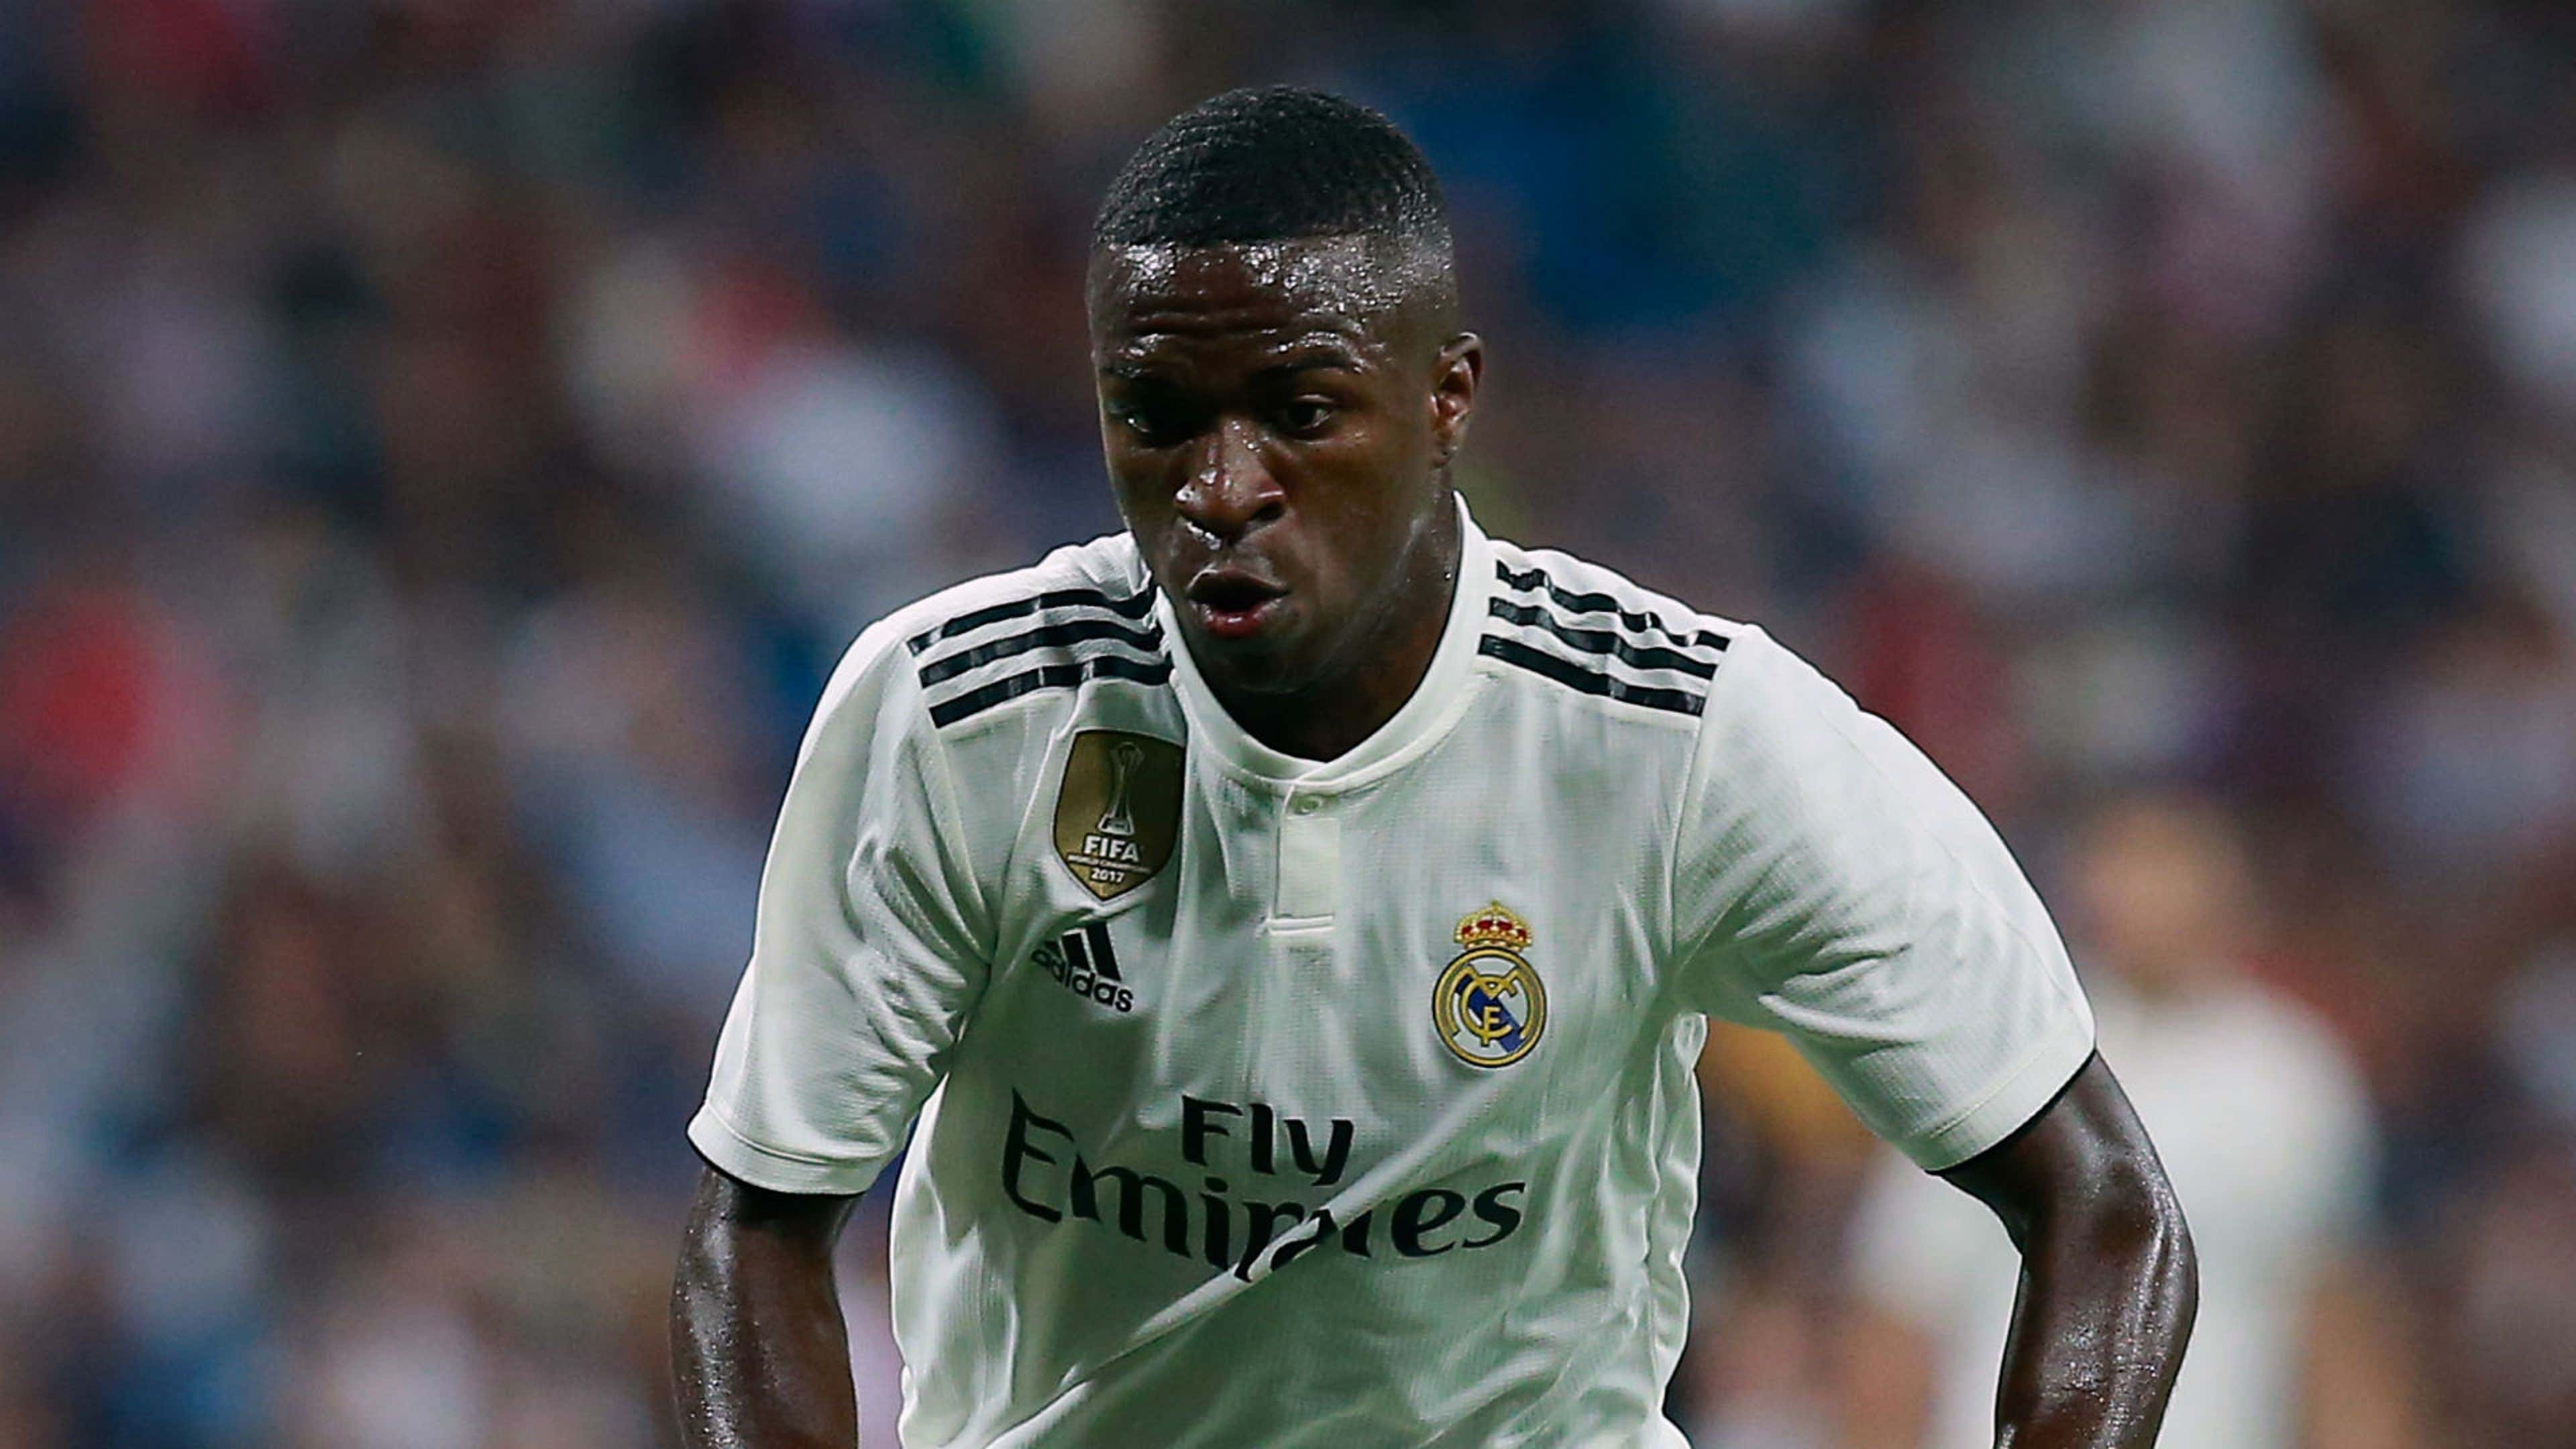 Transfer news: Vinicius Junior to remain at Real Madrid as agent